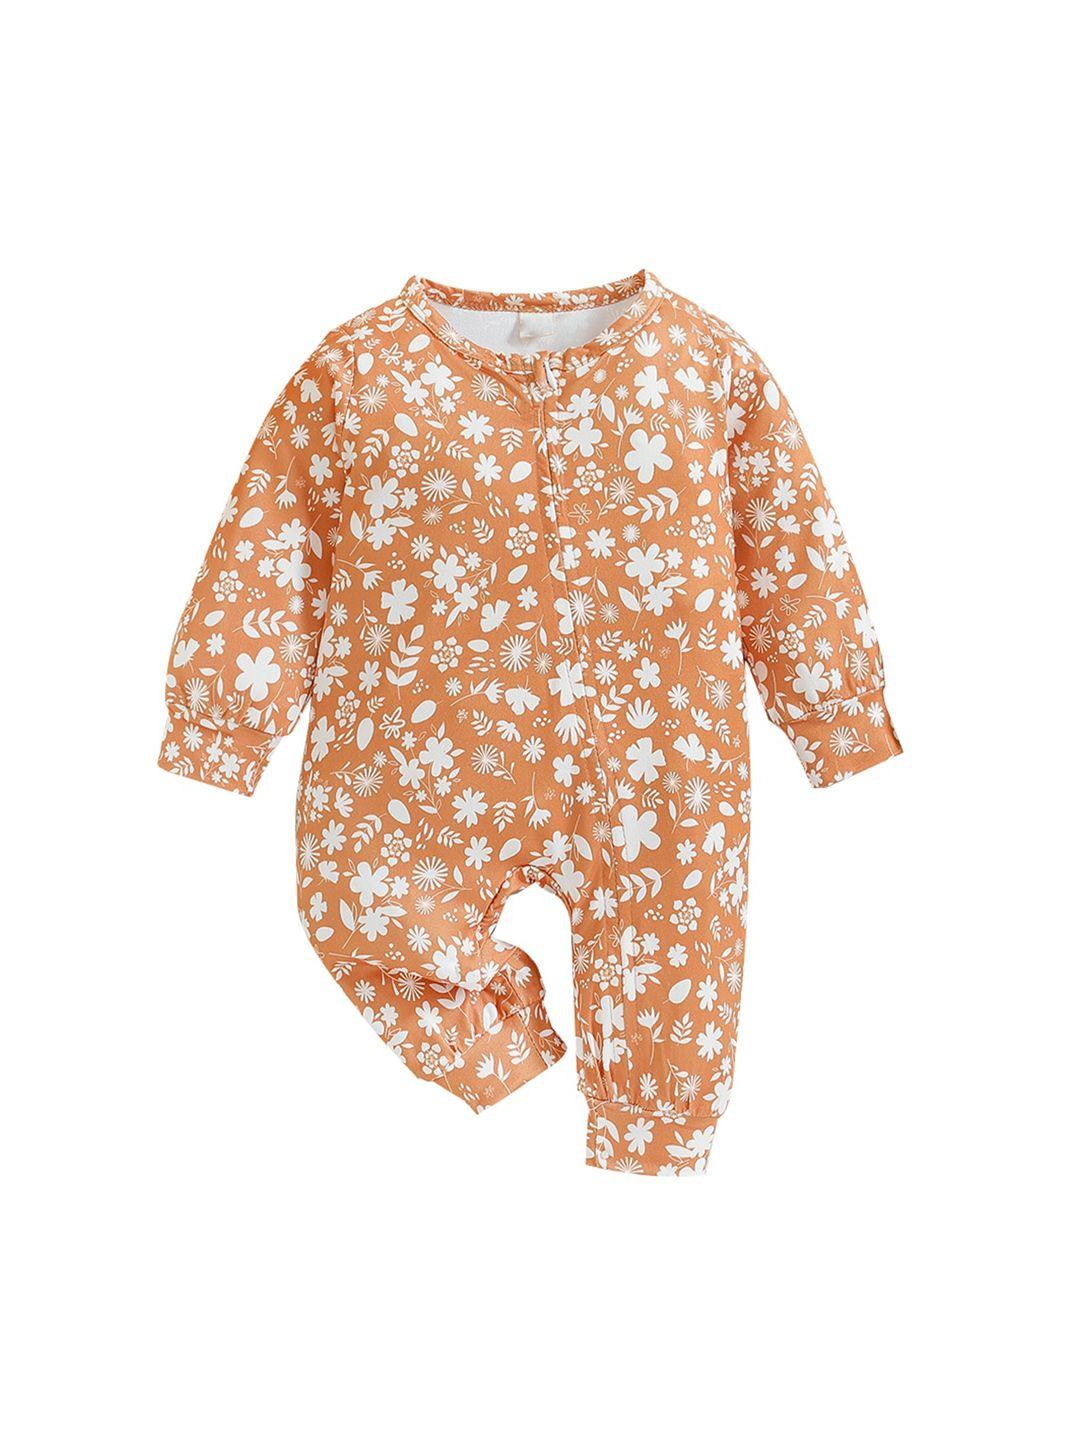 stylecast girls floral printed cotton rompers